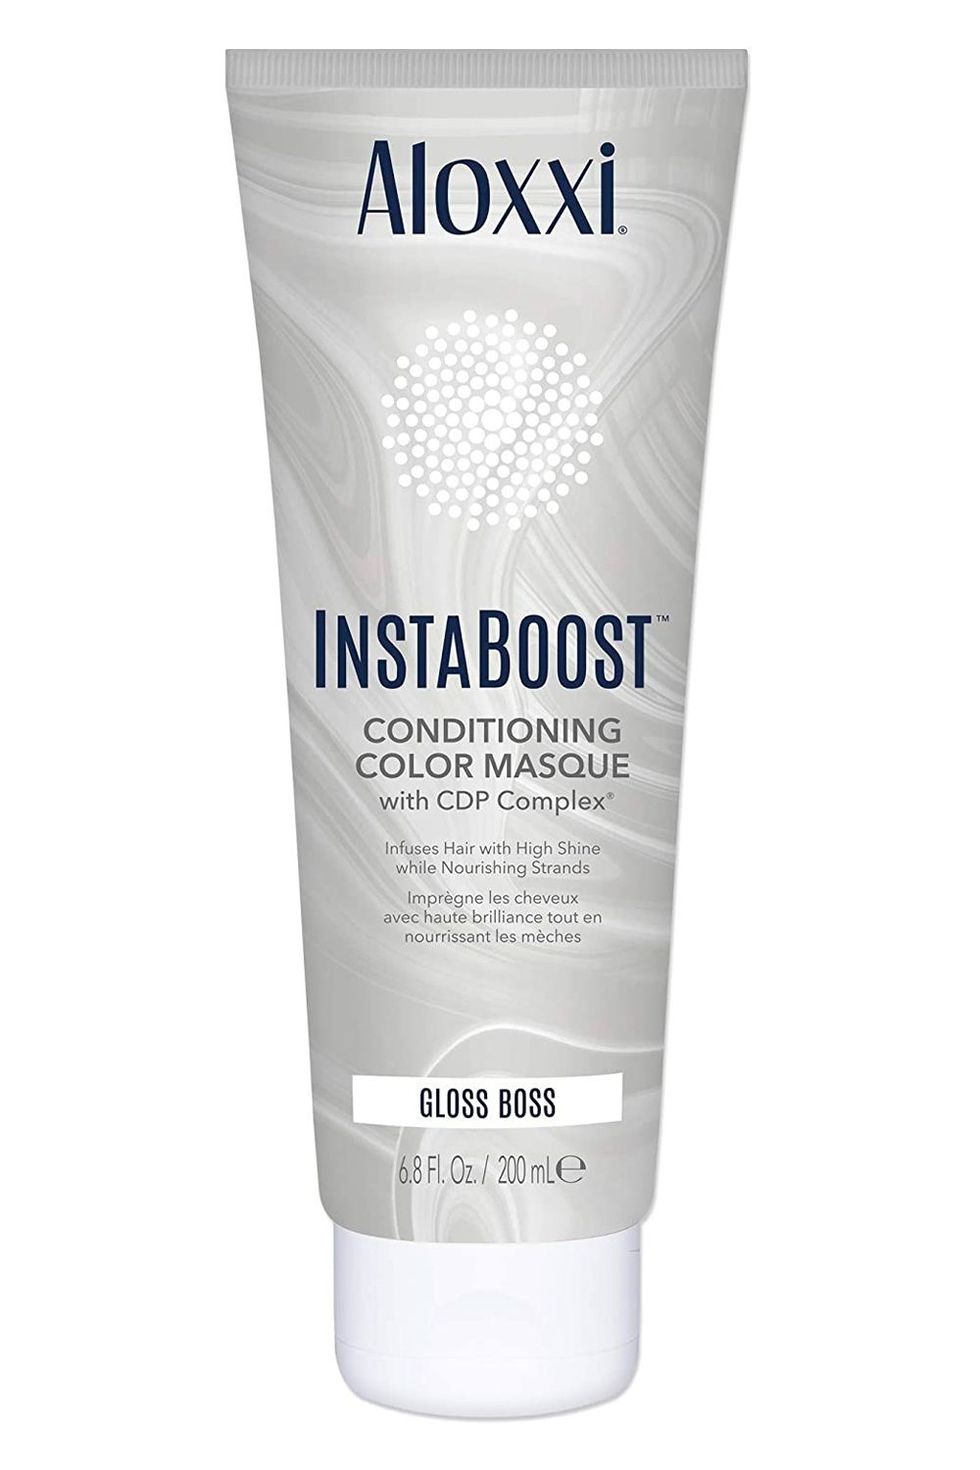 InstaBoost Conditioning Color Masque Gloss Boss